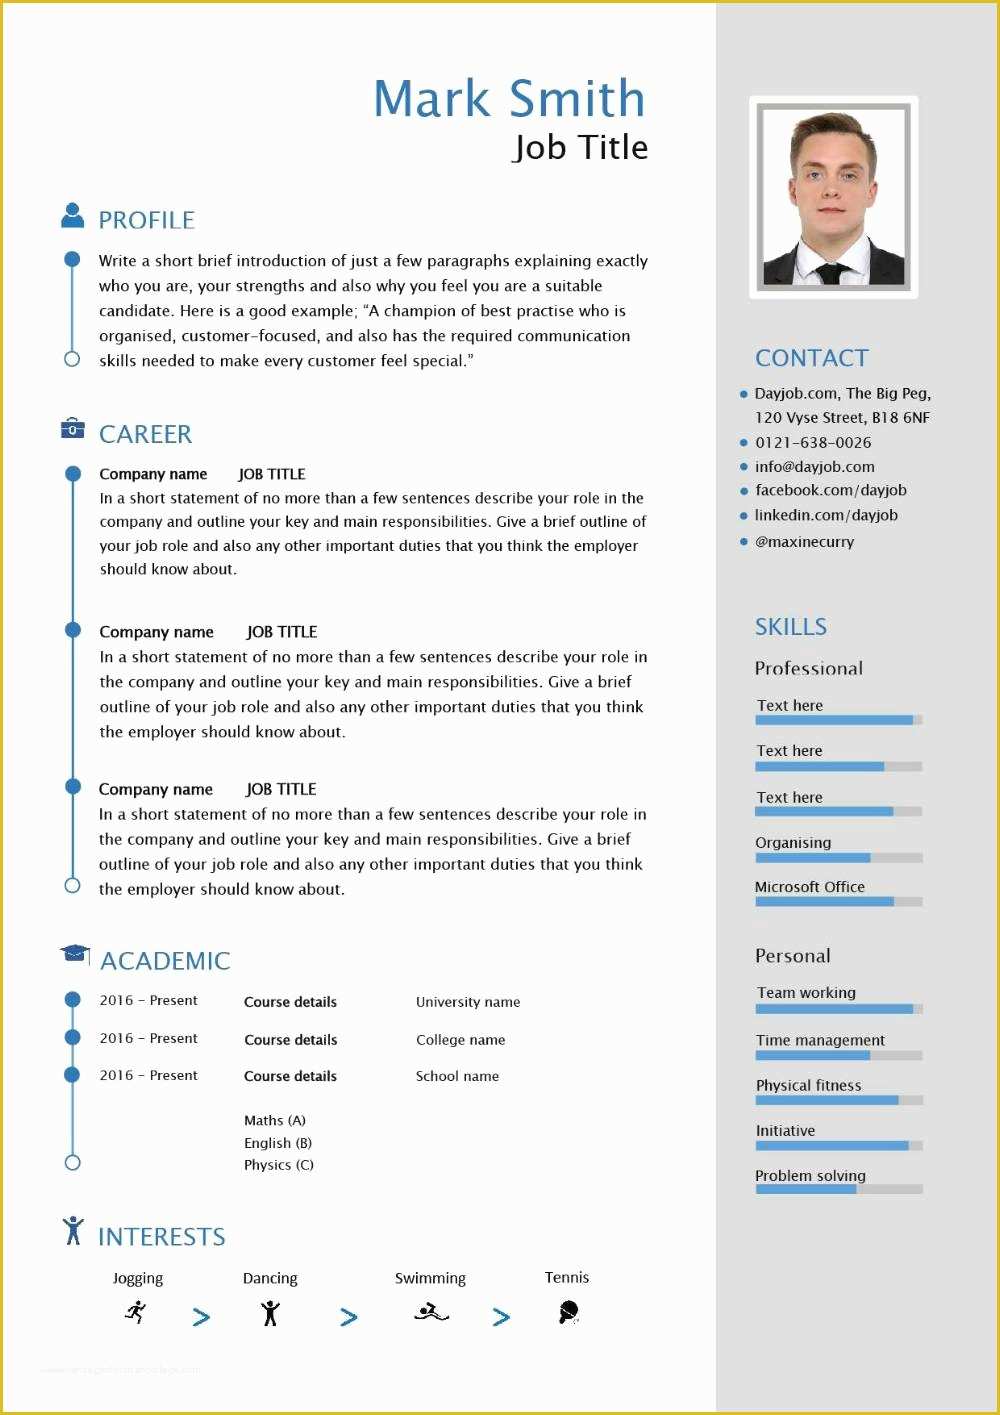 Free Modern Resume Templates Of Free Able Cv Template Examples Career Advice How